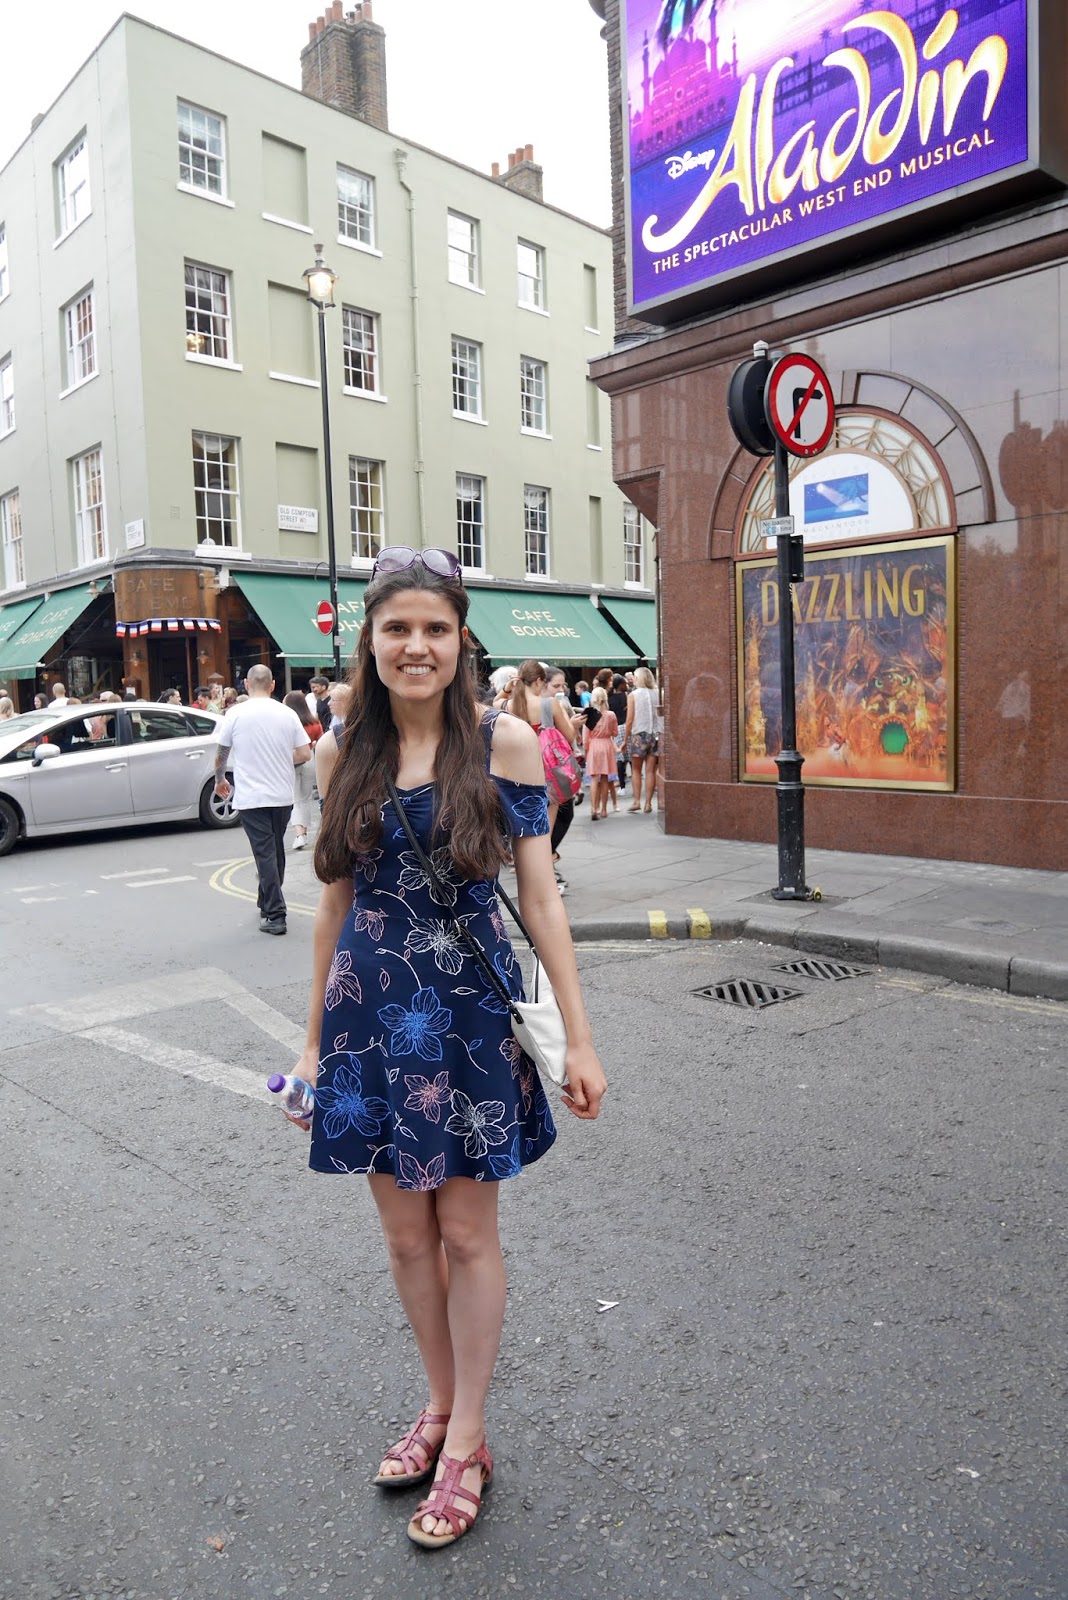 Kat Last outside the Prince Edward Theatre in London which is home to Aladdin The Musical